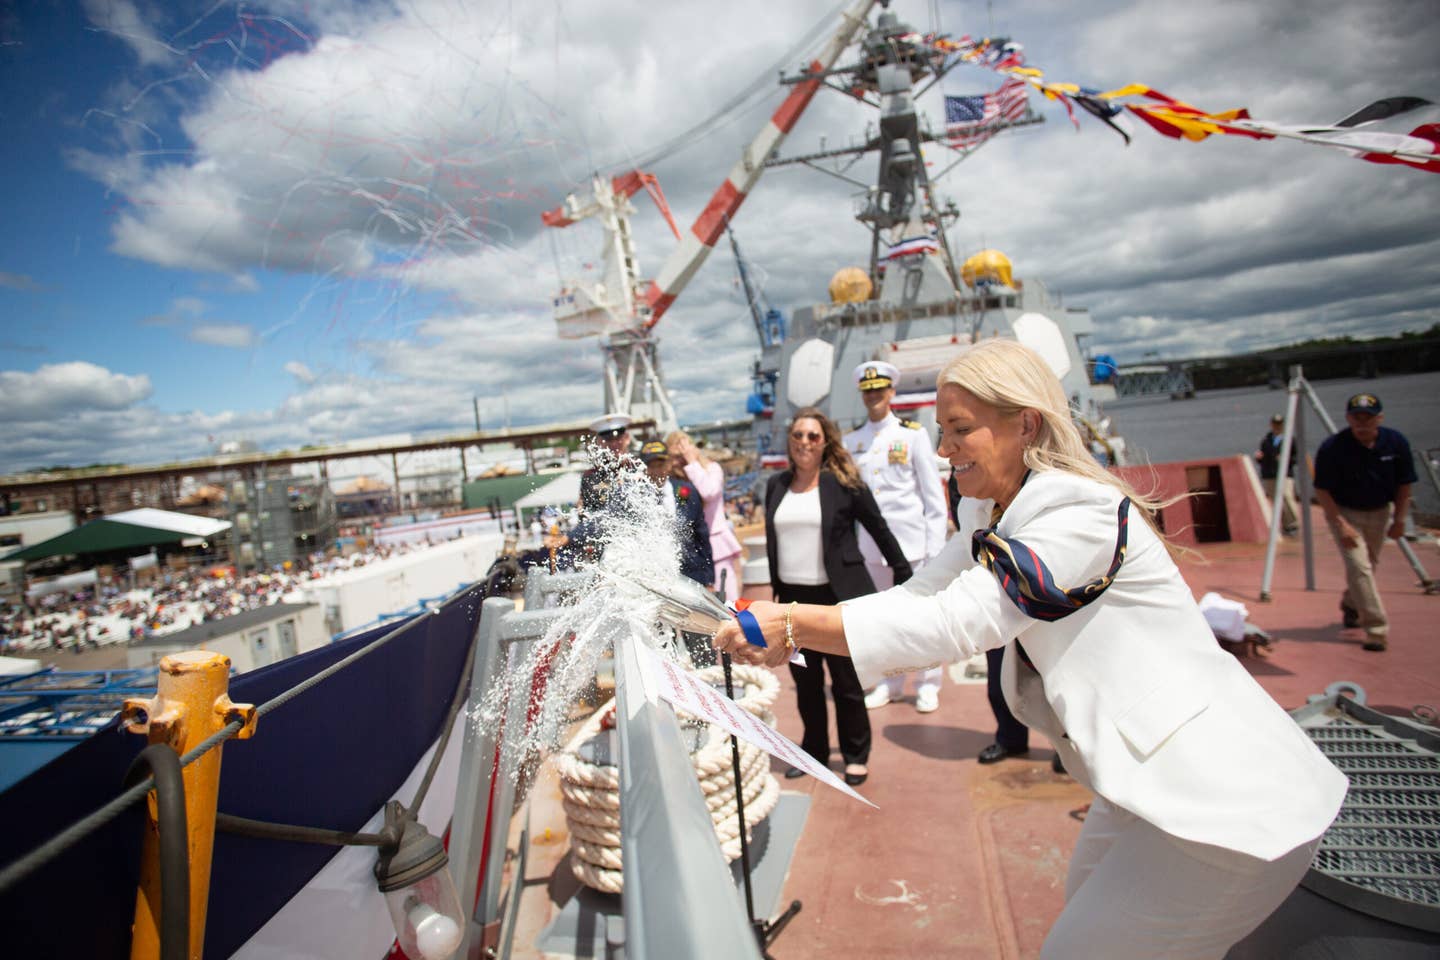 On Saturday, June 18, General Dynamics Bath Iron Works christened the U.S. Navy’s newest guided-missile destroyer, the future <em>USS John Basilone</em>. (General Dynamics Bath Iron Works photo).